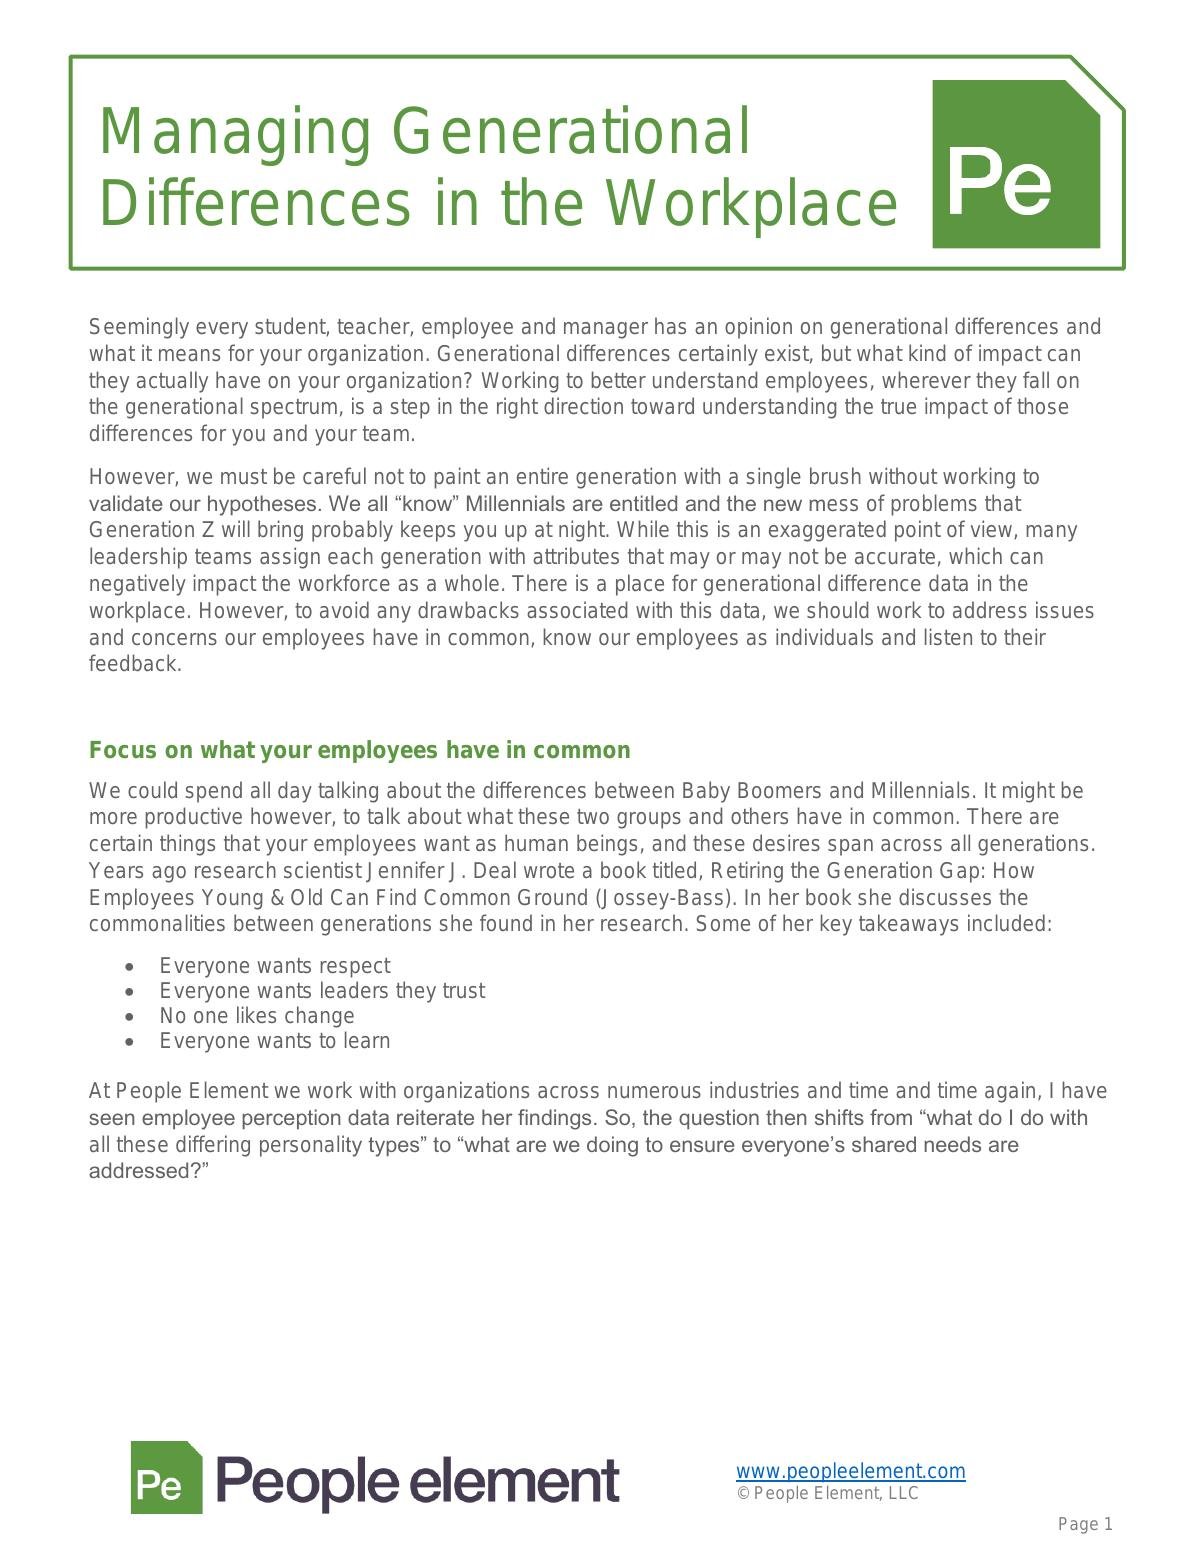 Managing Generational Differences in the Workplace